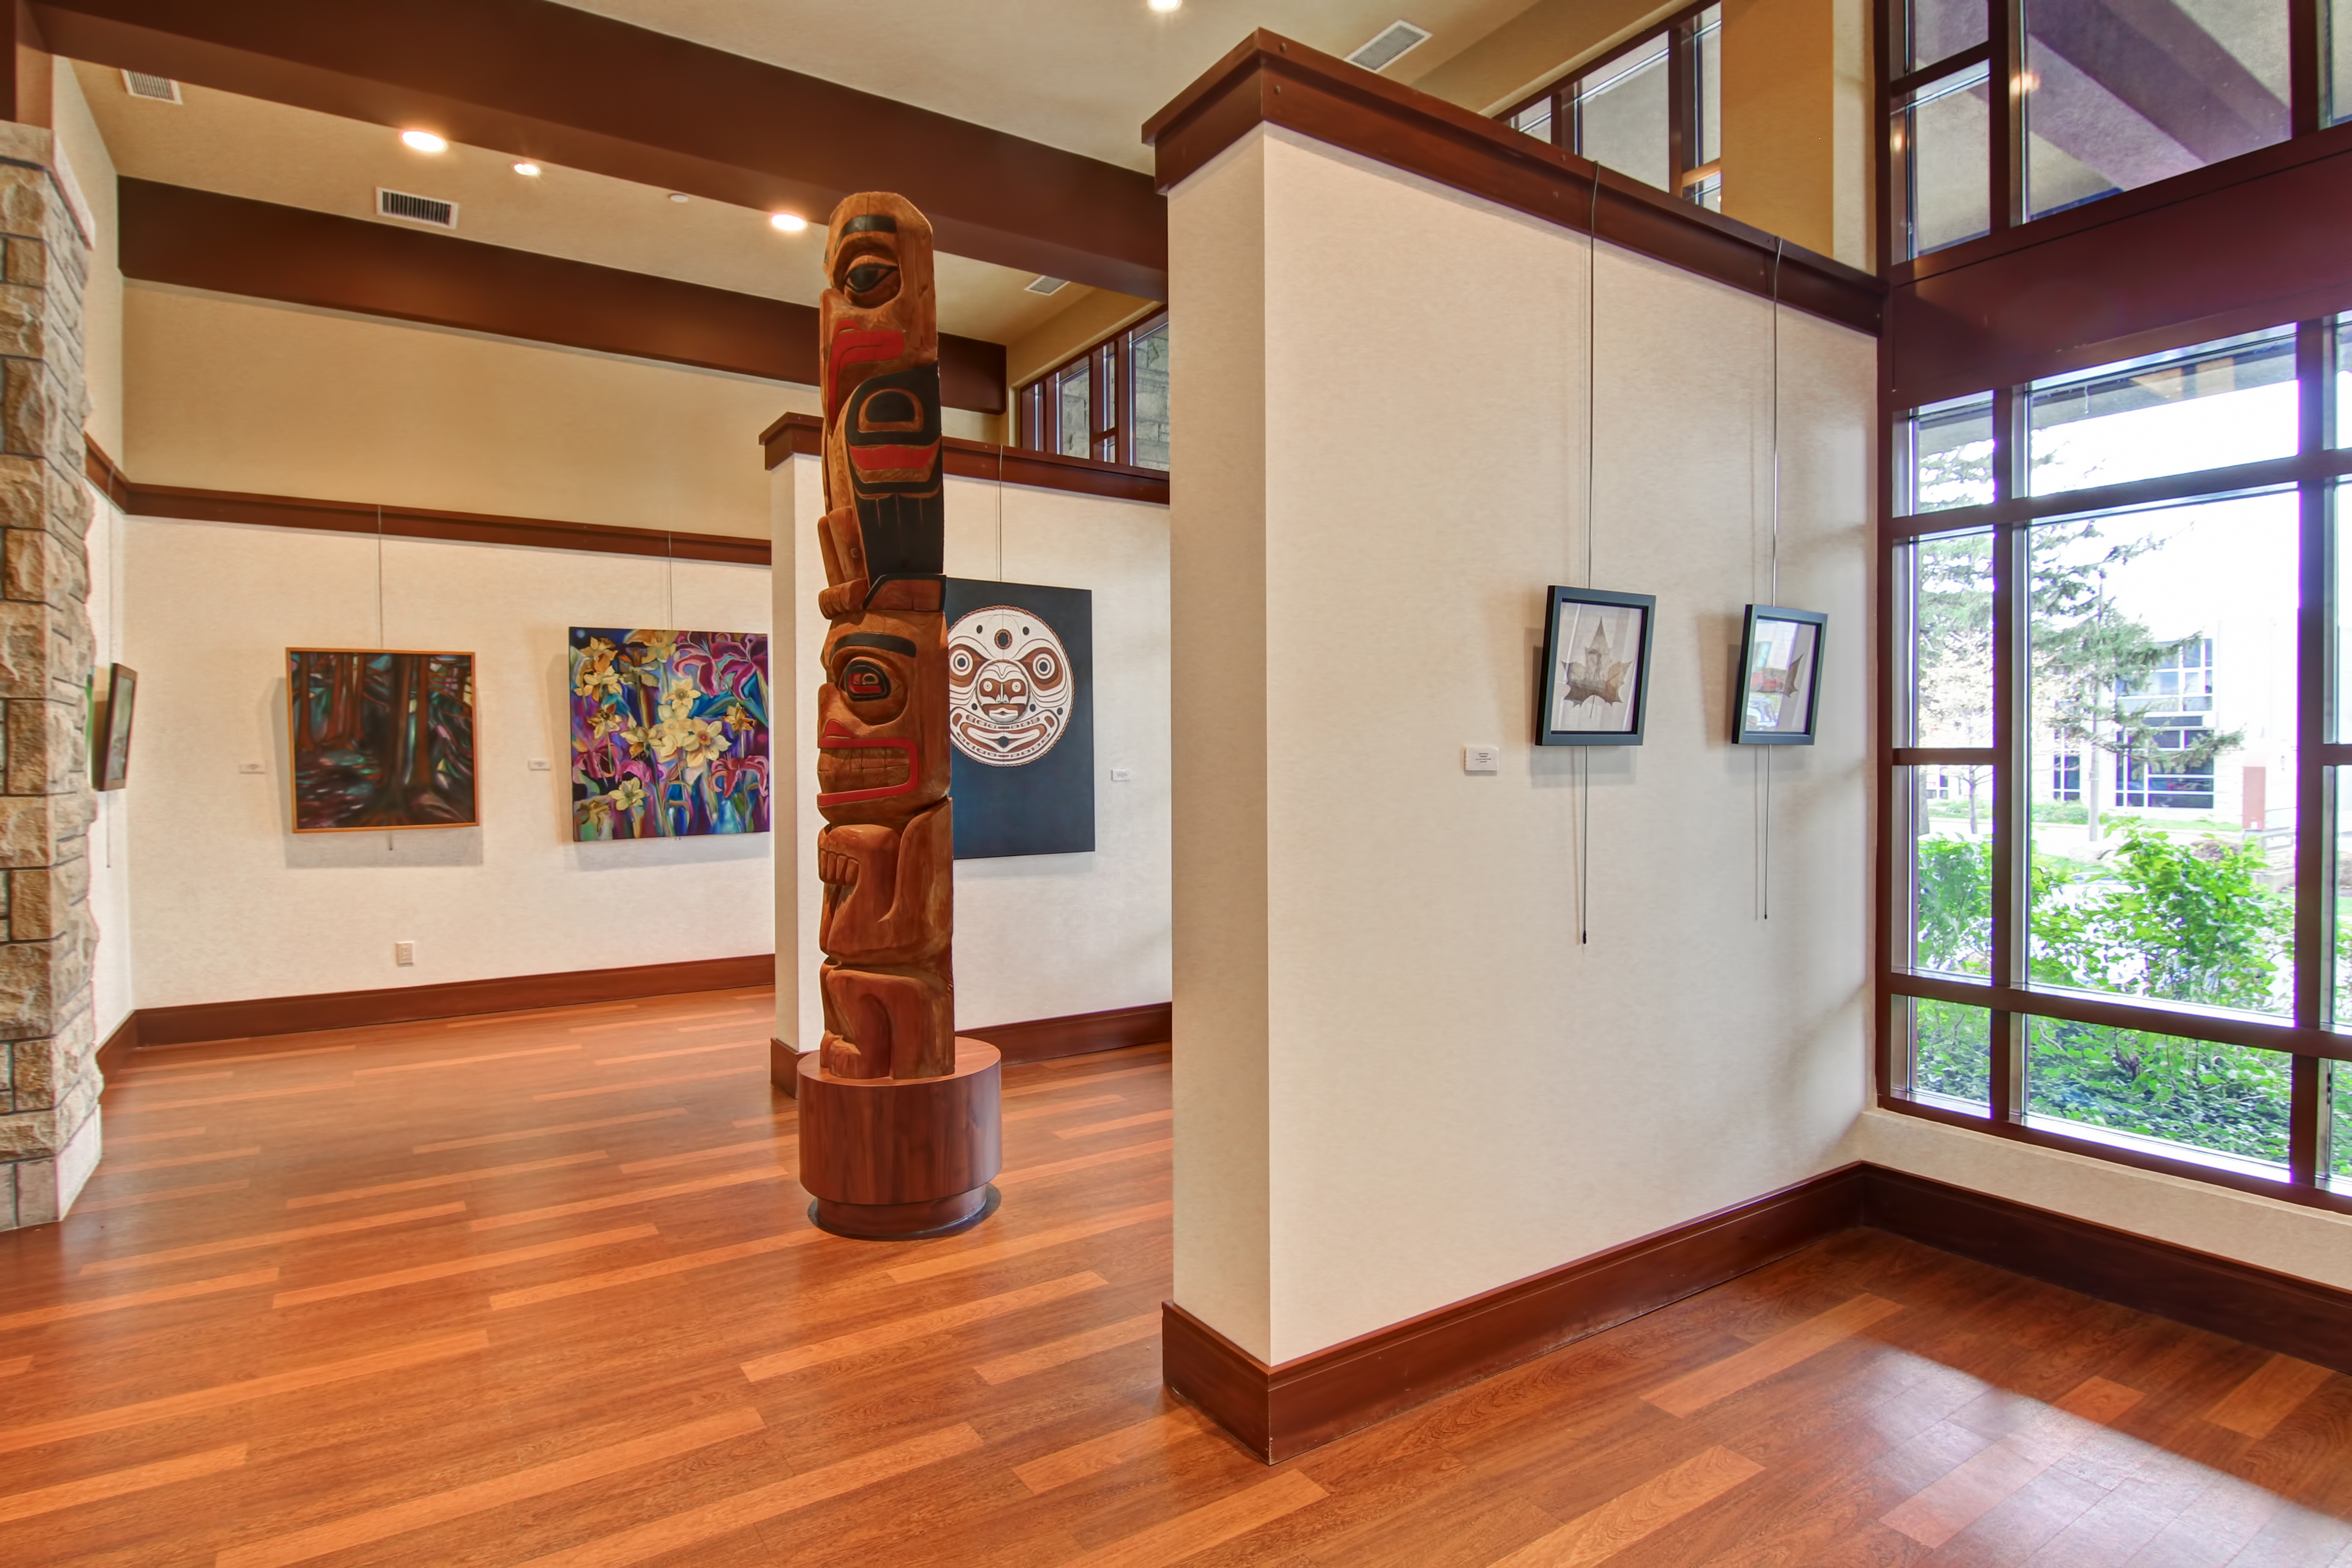 On-site art gallery with artwork